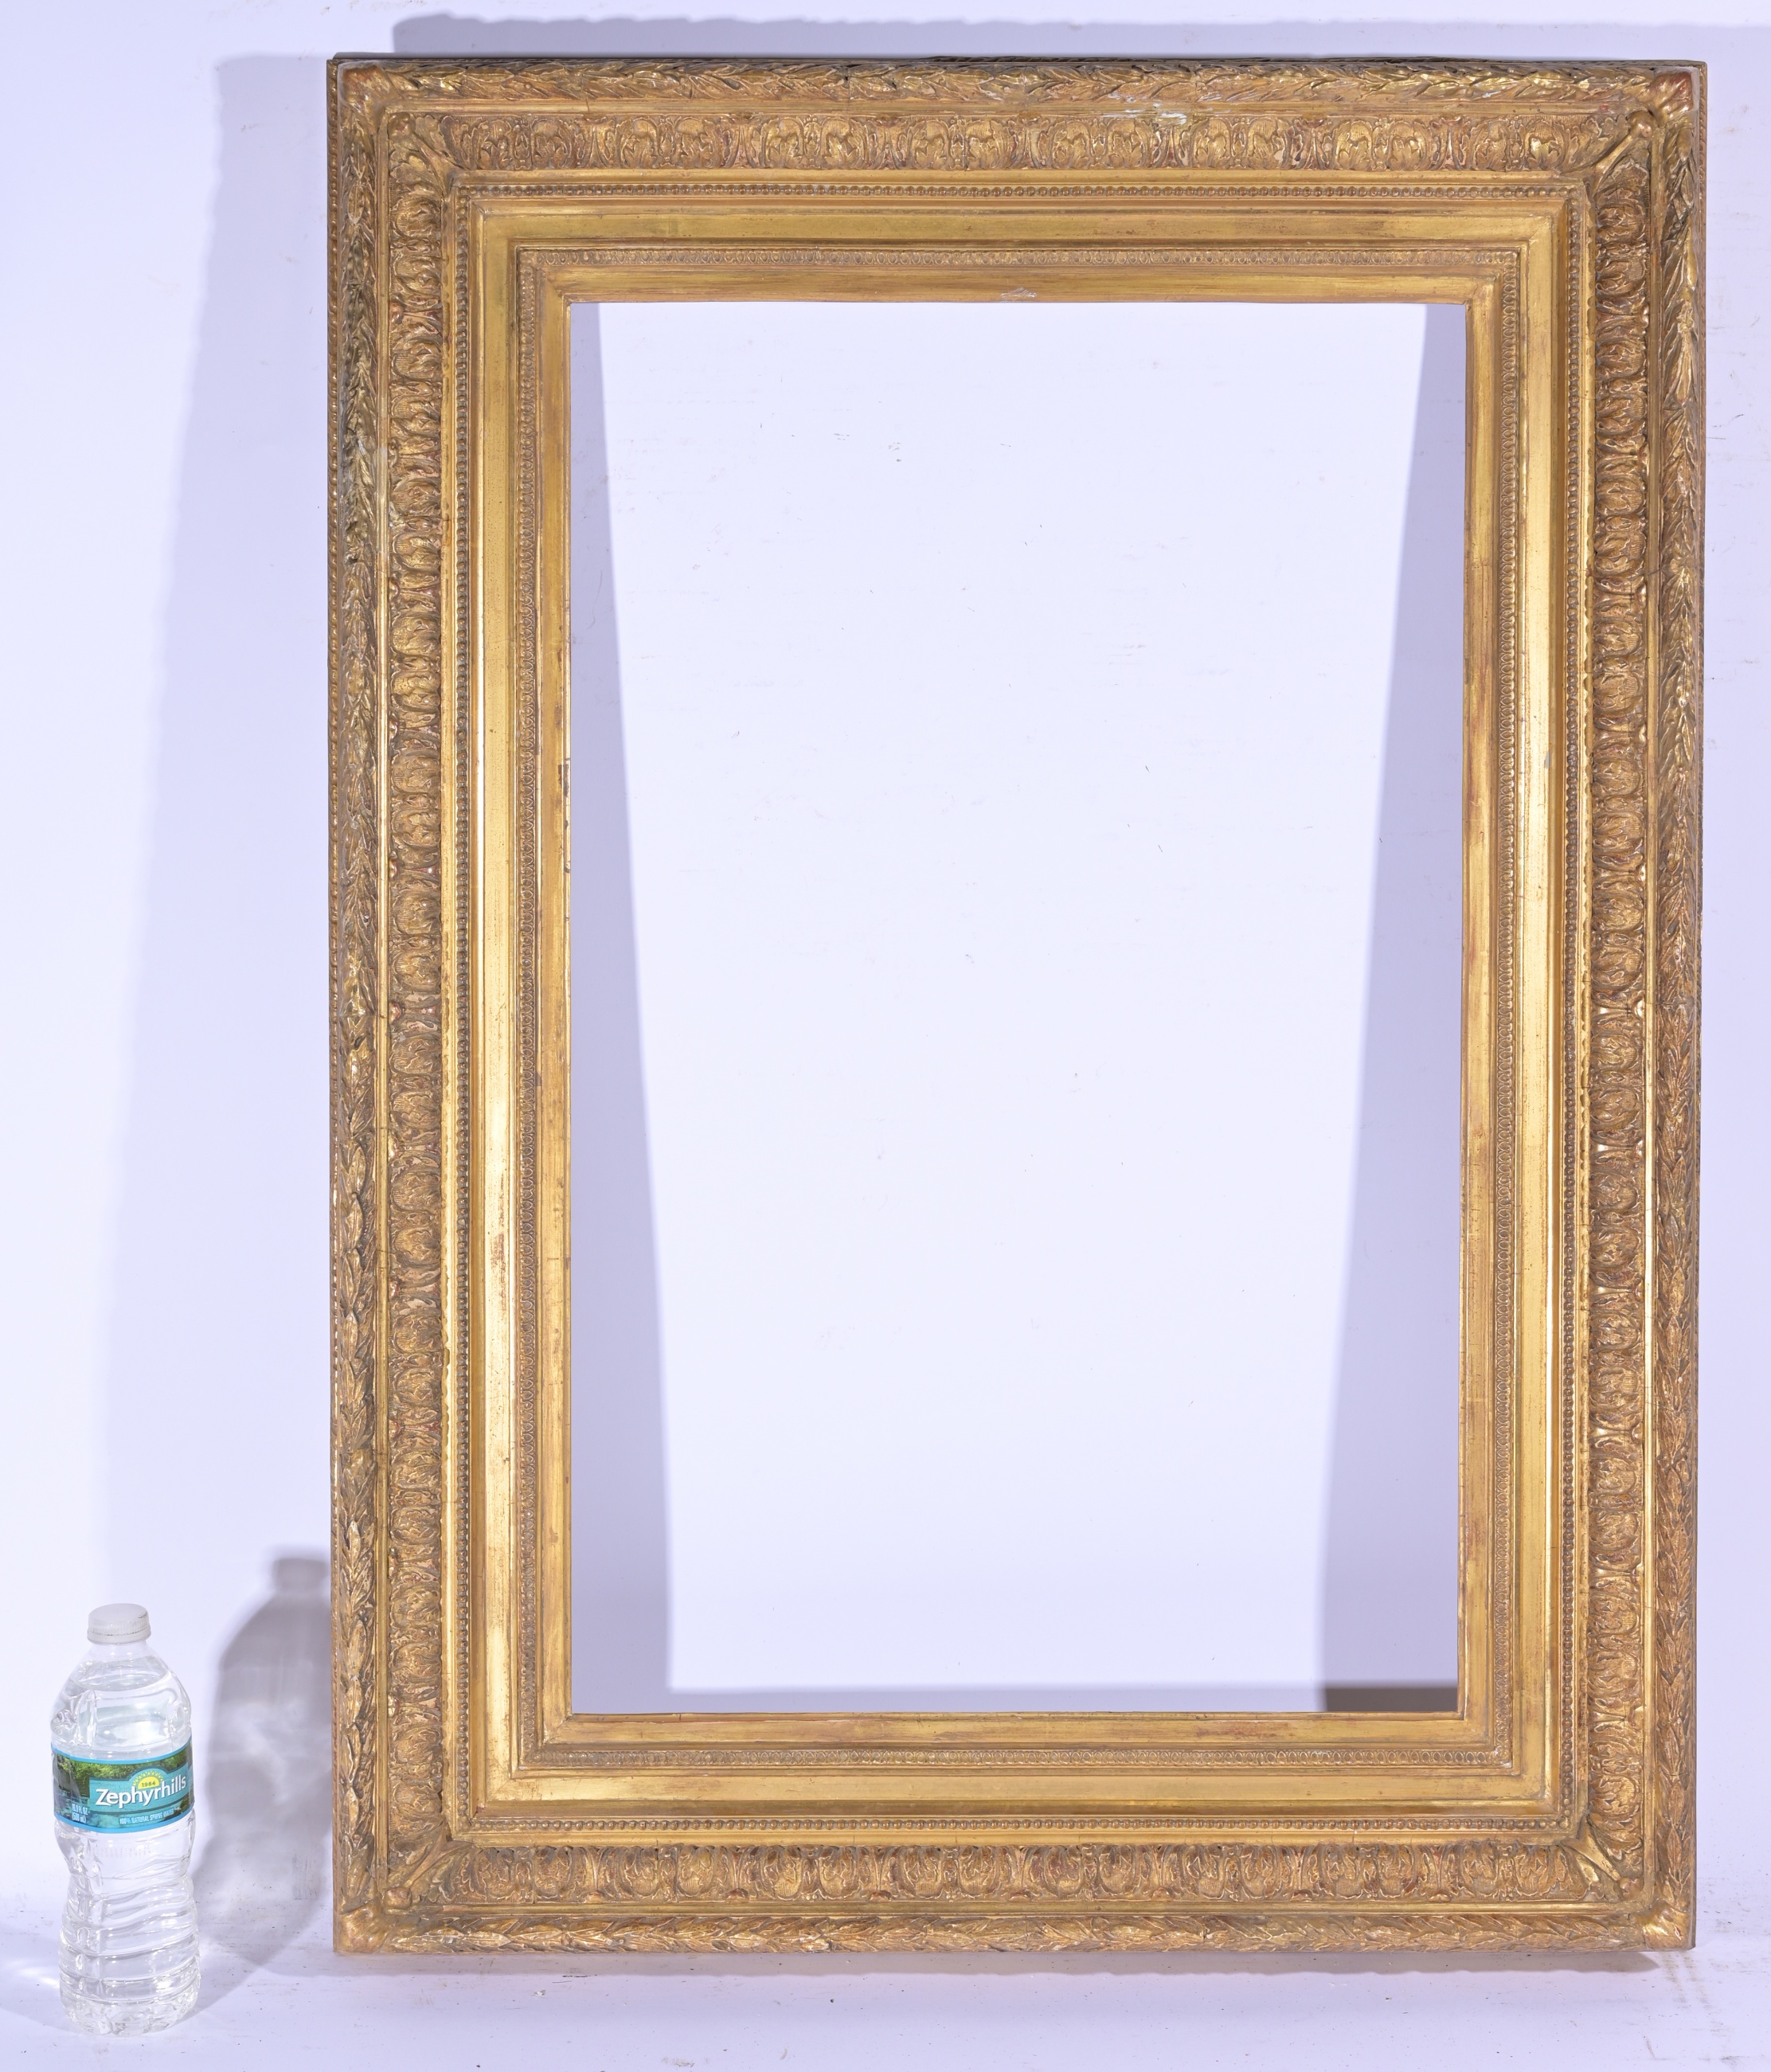 French,19th century Gilt Wood Frame - 28 x 18 - Image 2 of 9